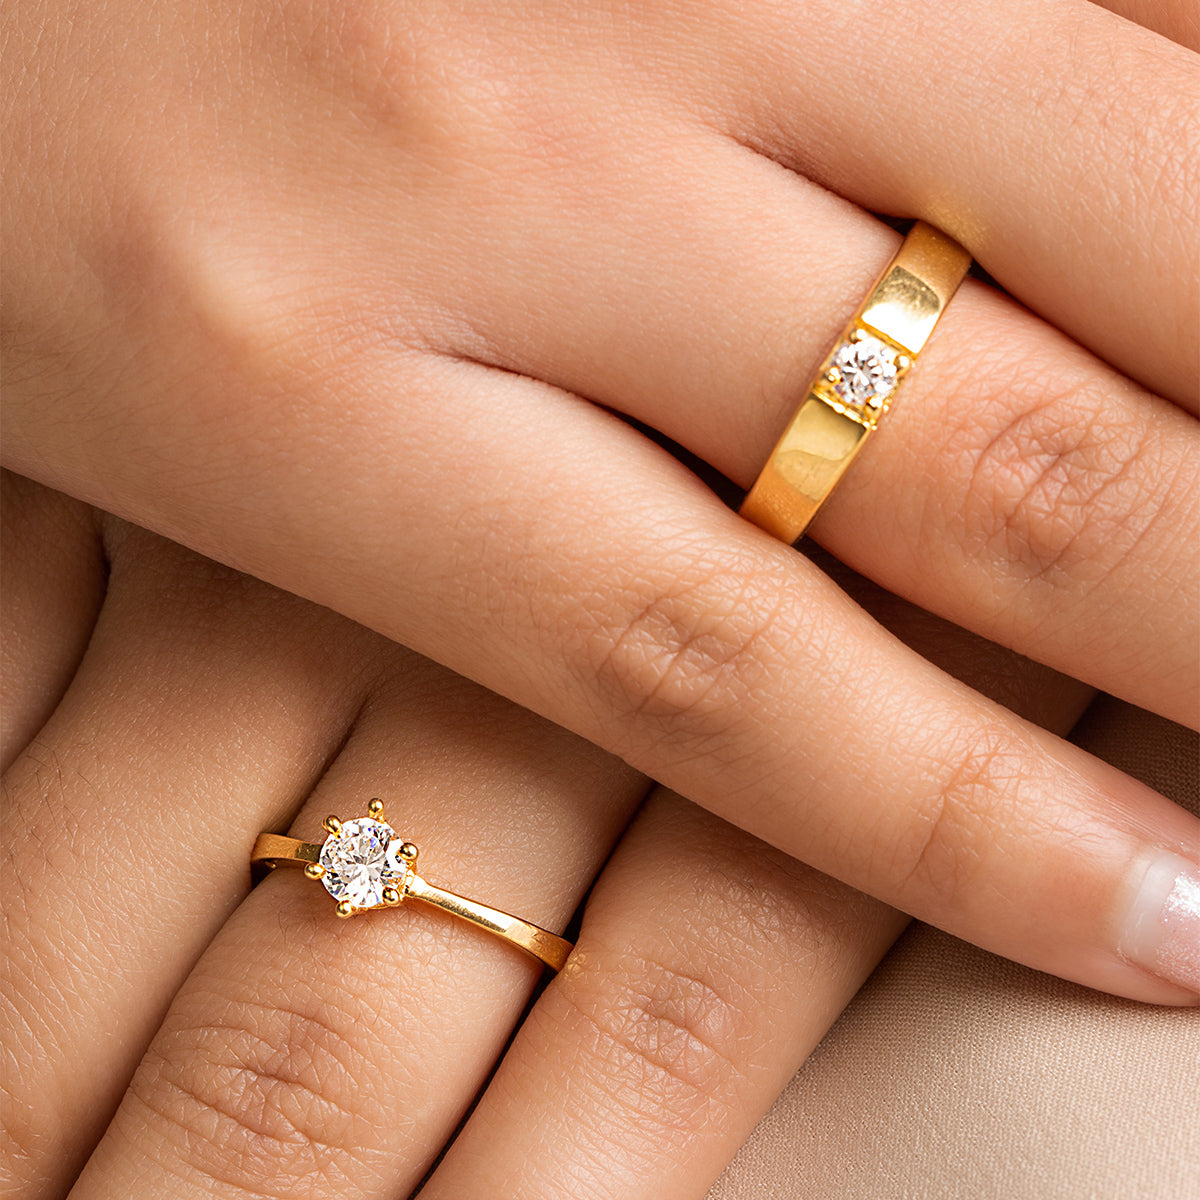 Why Are Engagement Rings Worn on the Left Hand? – Noe's Jewelry